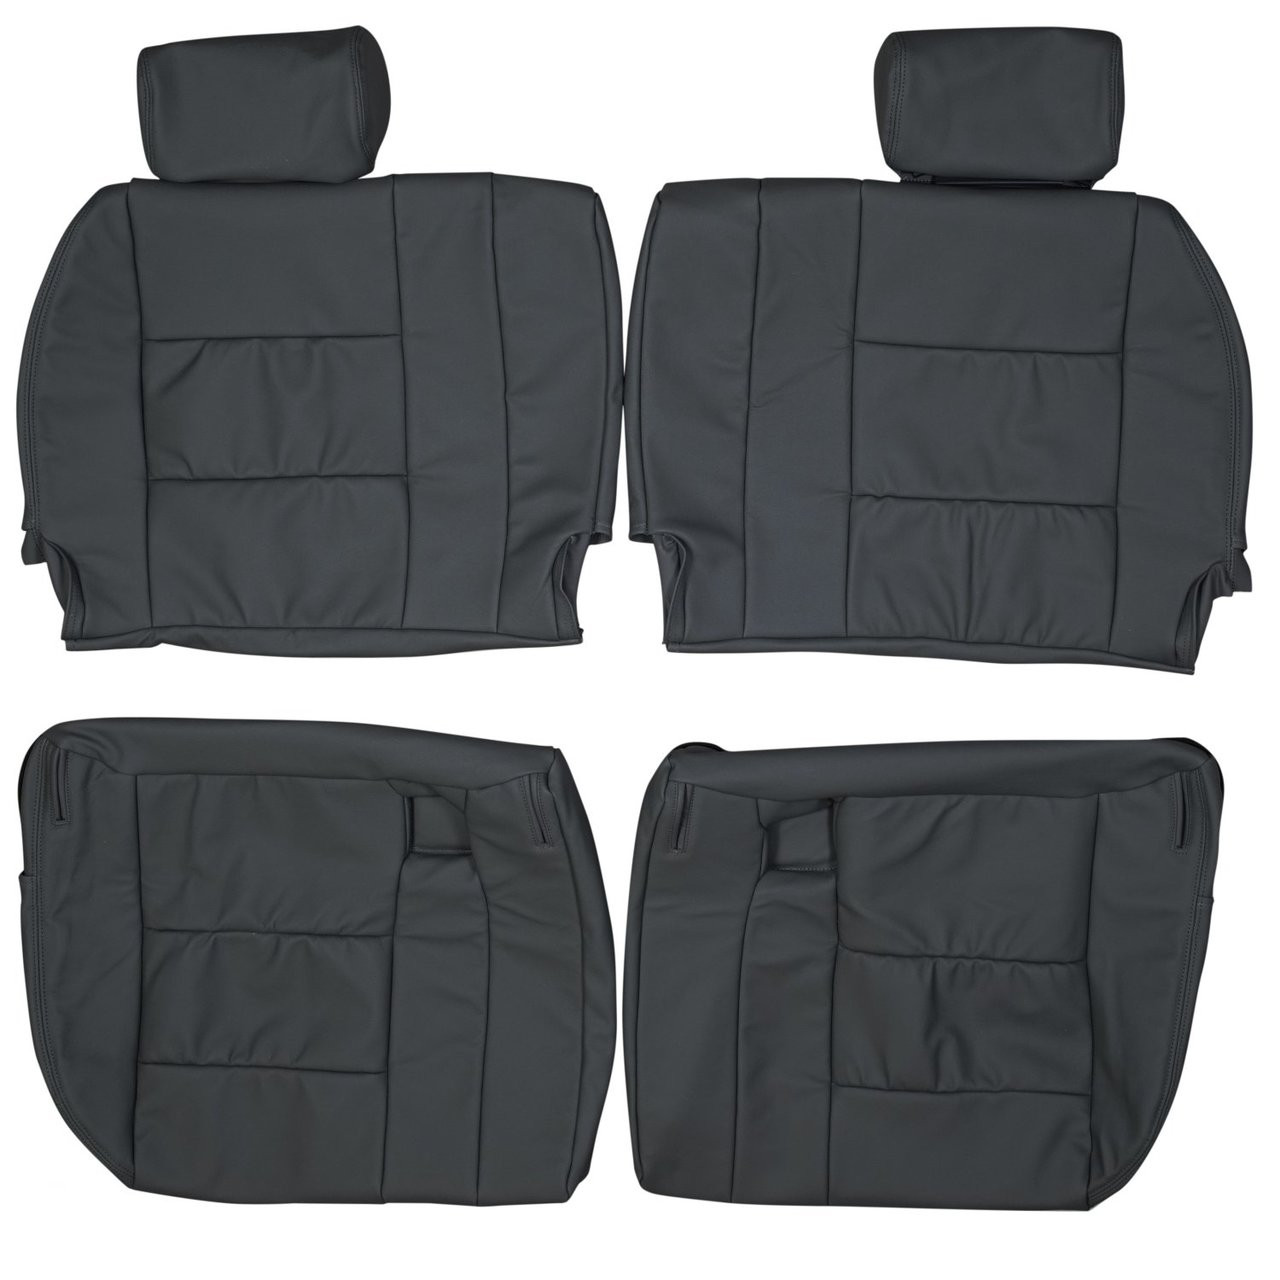 1998-2007 Toyota Land Cruiser J100 Custom Real Leather Seat Covers (3rd  row) - Lseat.com